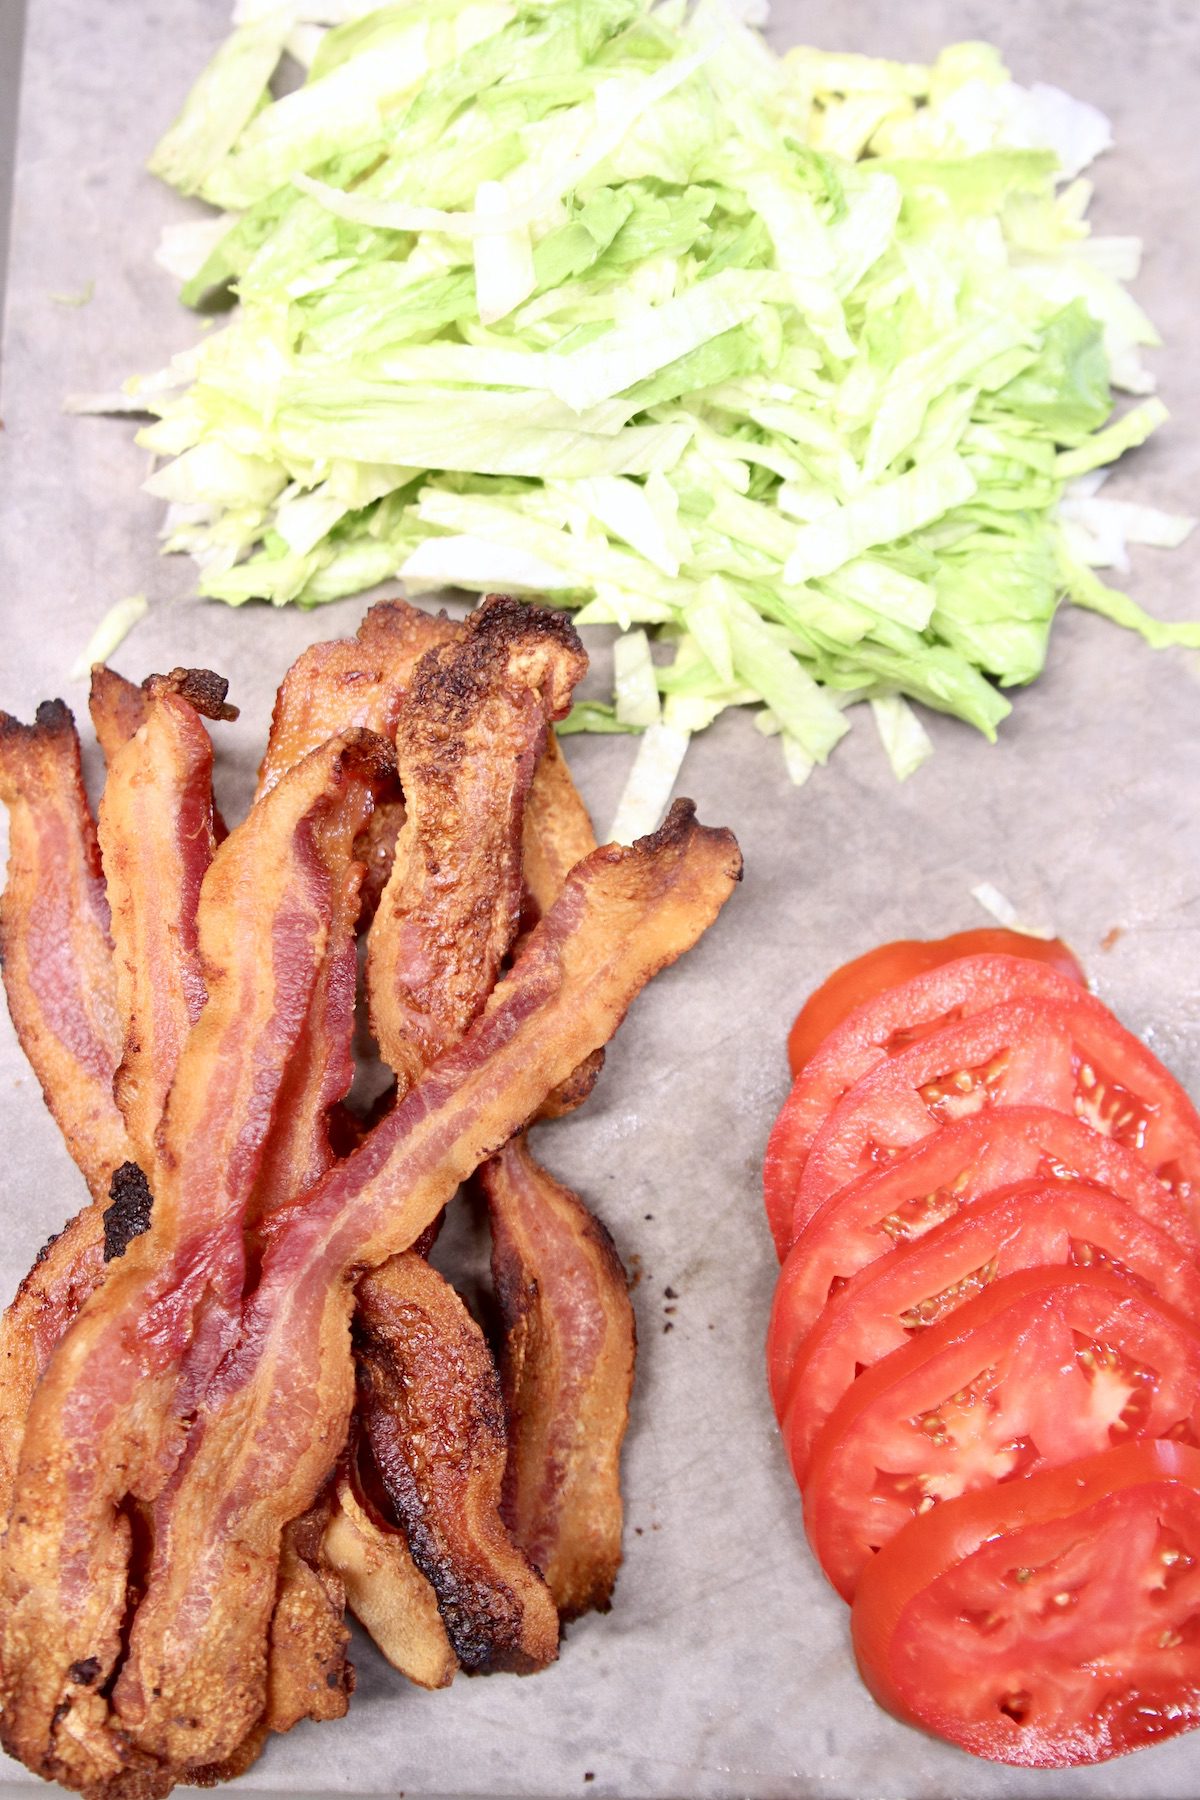 bacon slices, tomato slices, shredded lettuce on a cutting board